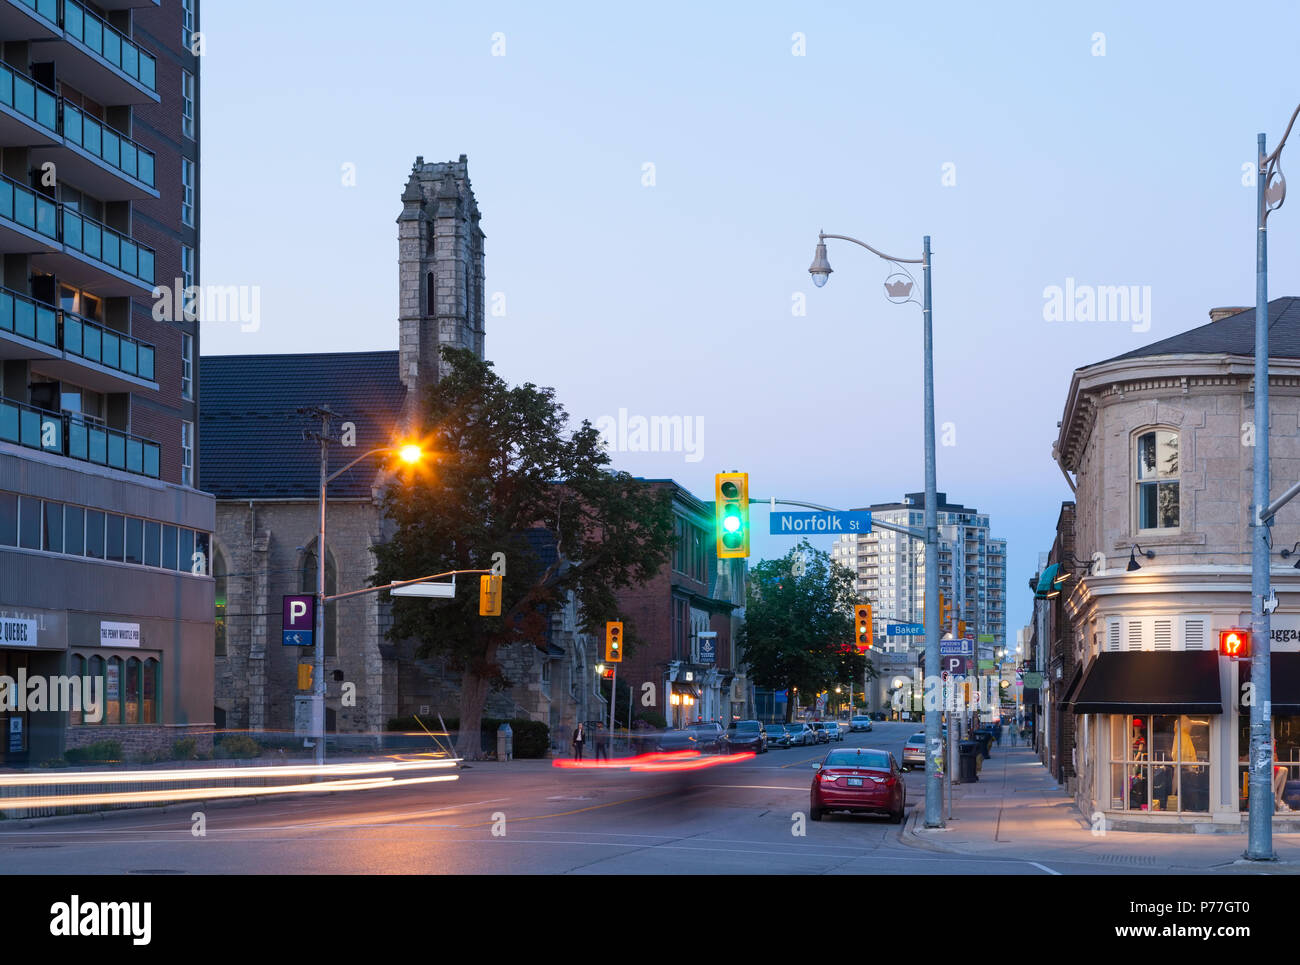 https://c8.alamy.com/comp/P77GT0/norfolk-street-at-dusk-in-downtown-guelph-ontario-canada-P77GT0.jpg